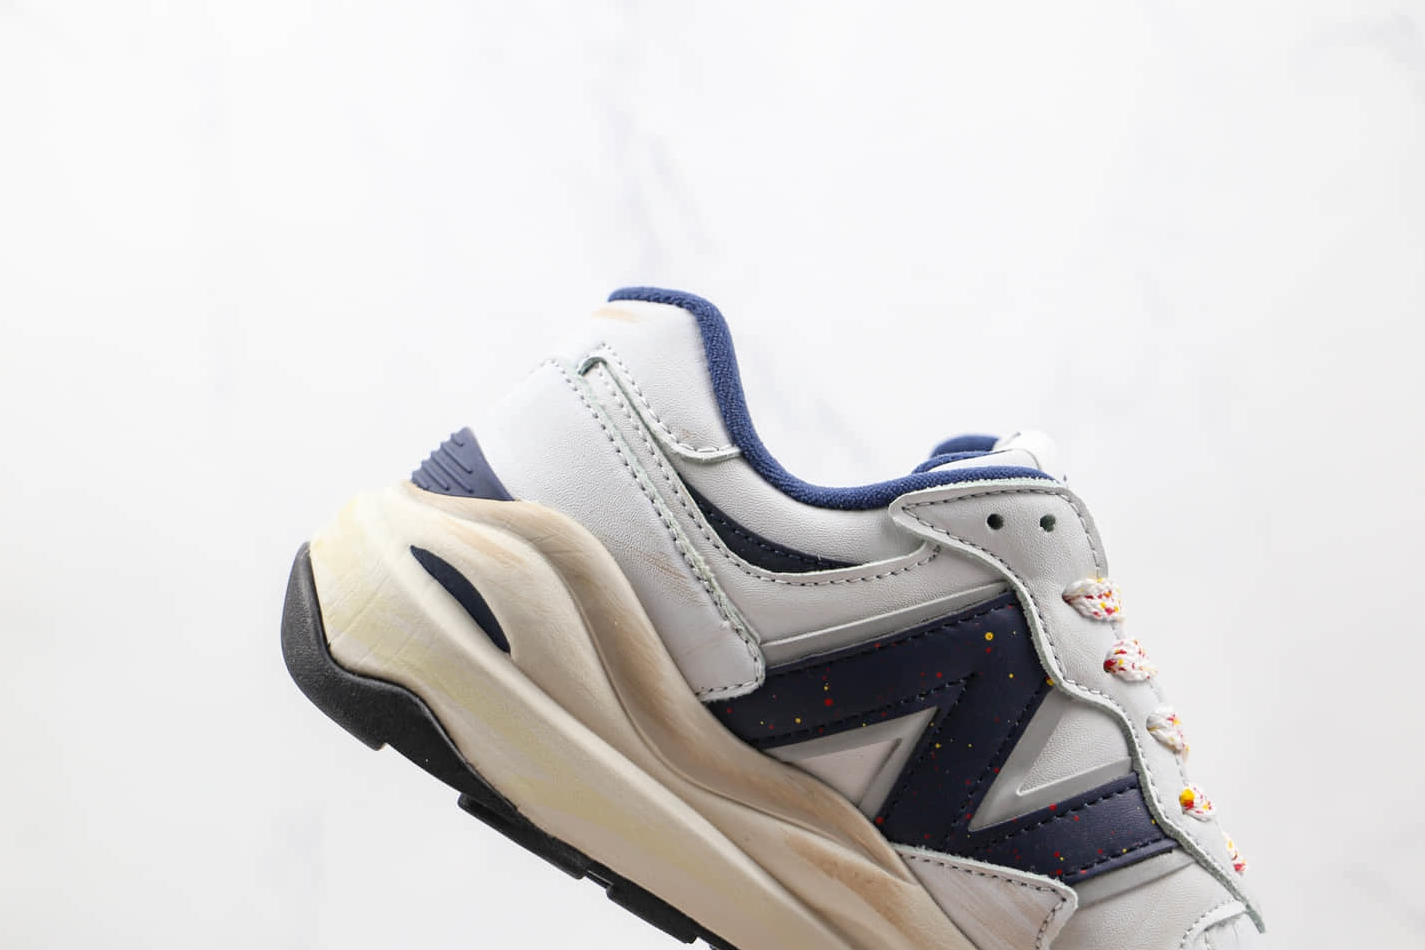 New Balance 57 40 'Father's Day' M5740FD1 - Stylish Sneakers for Dads!